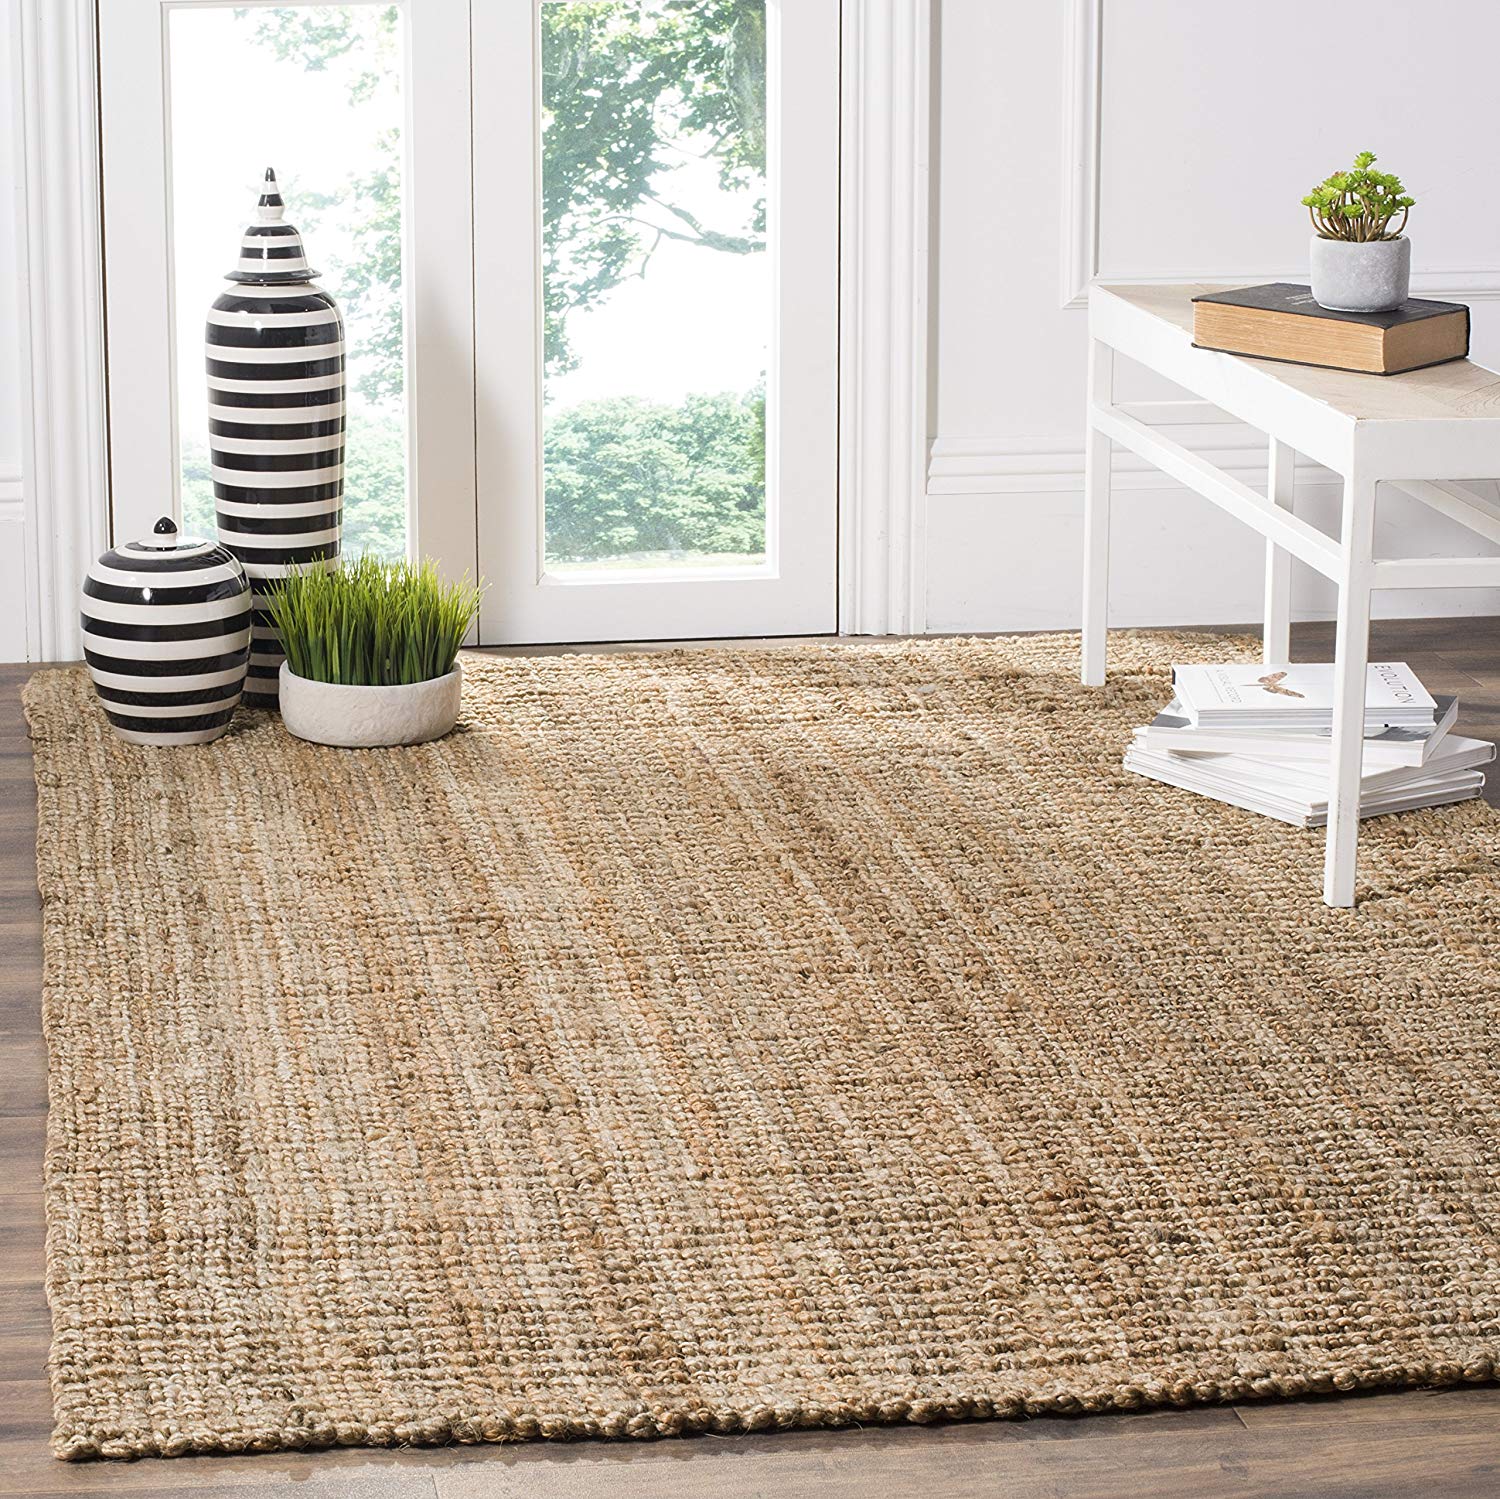 An overview on different types of natural rugs